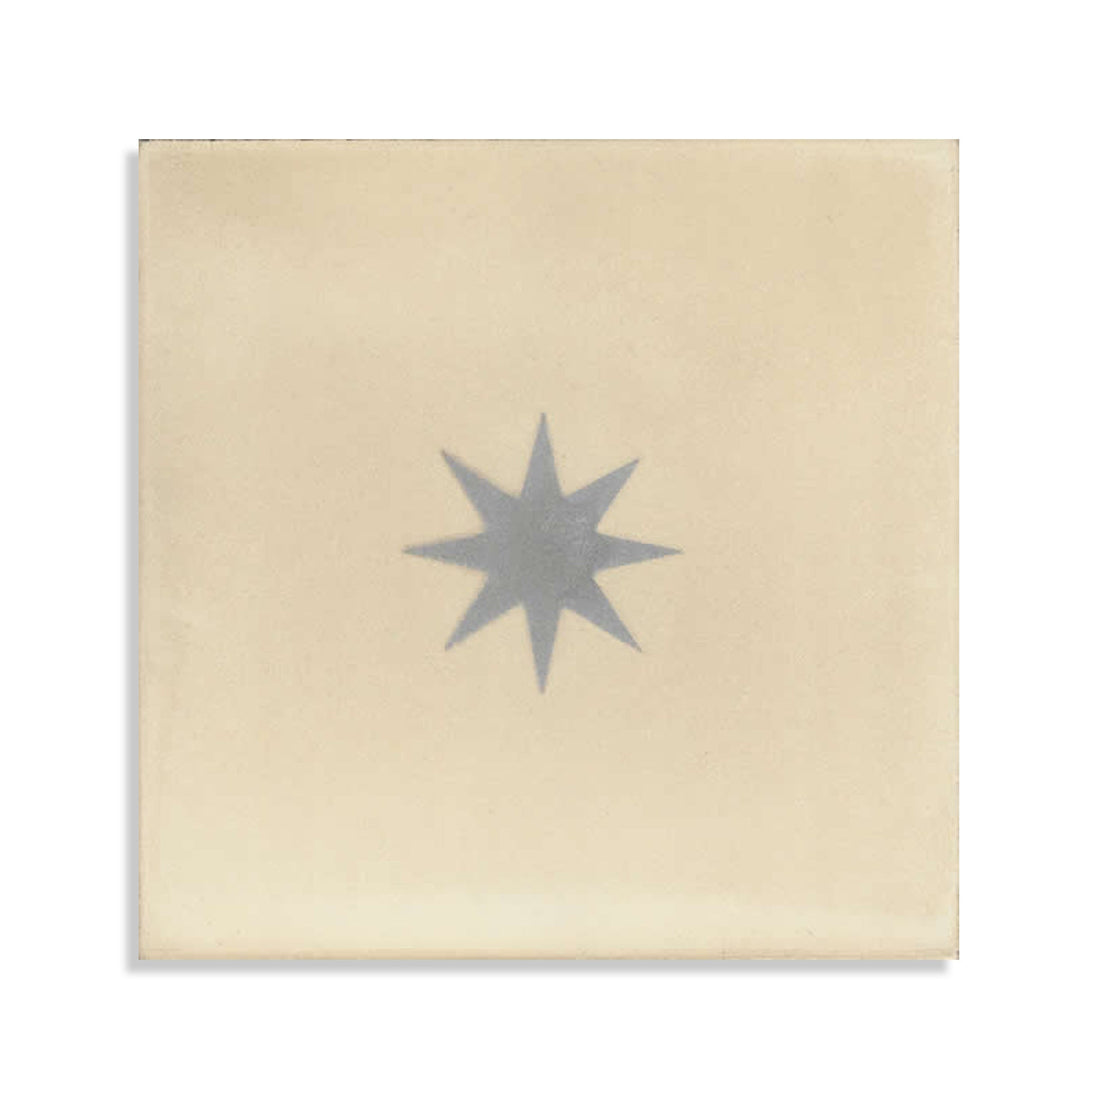 Moroccan Encaustic Cement Pattern gr17, 20 x 20cm - Tiles &amp; Stone To You